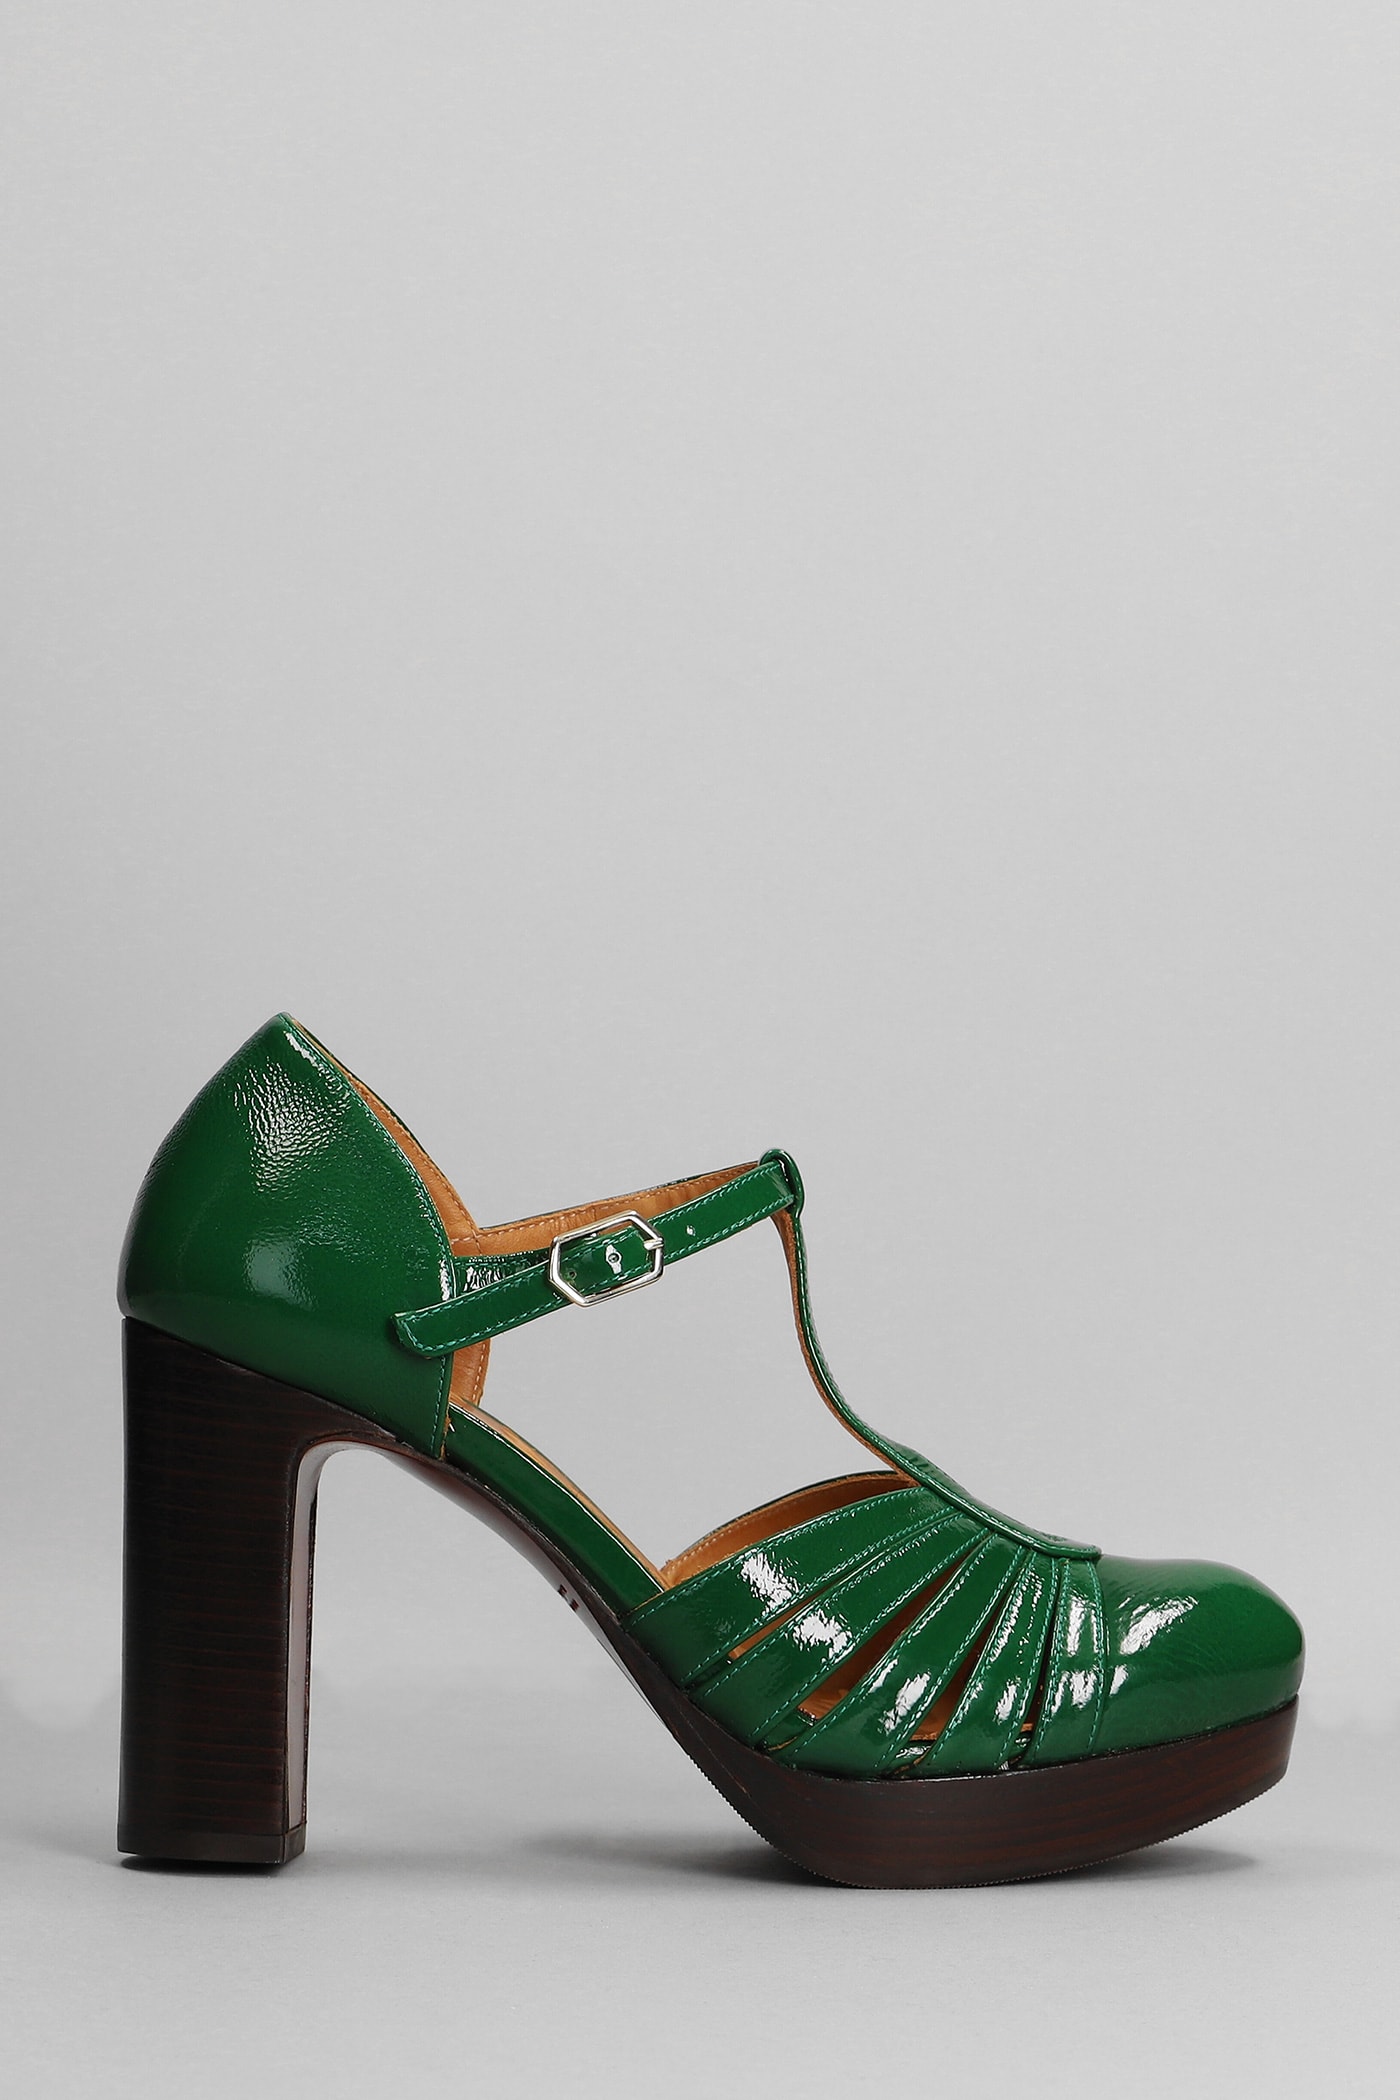 Chie Mihara Yelo Pumps In Green Leather